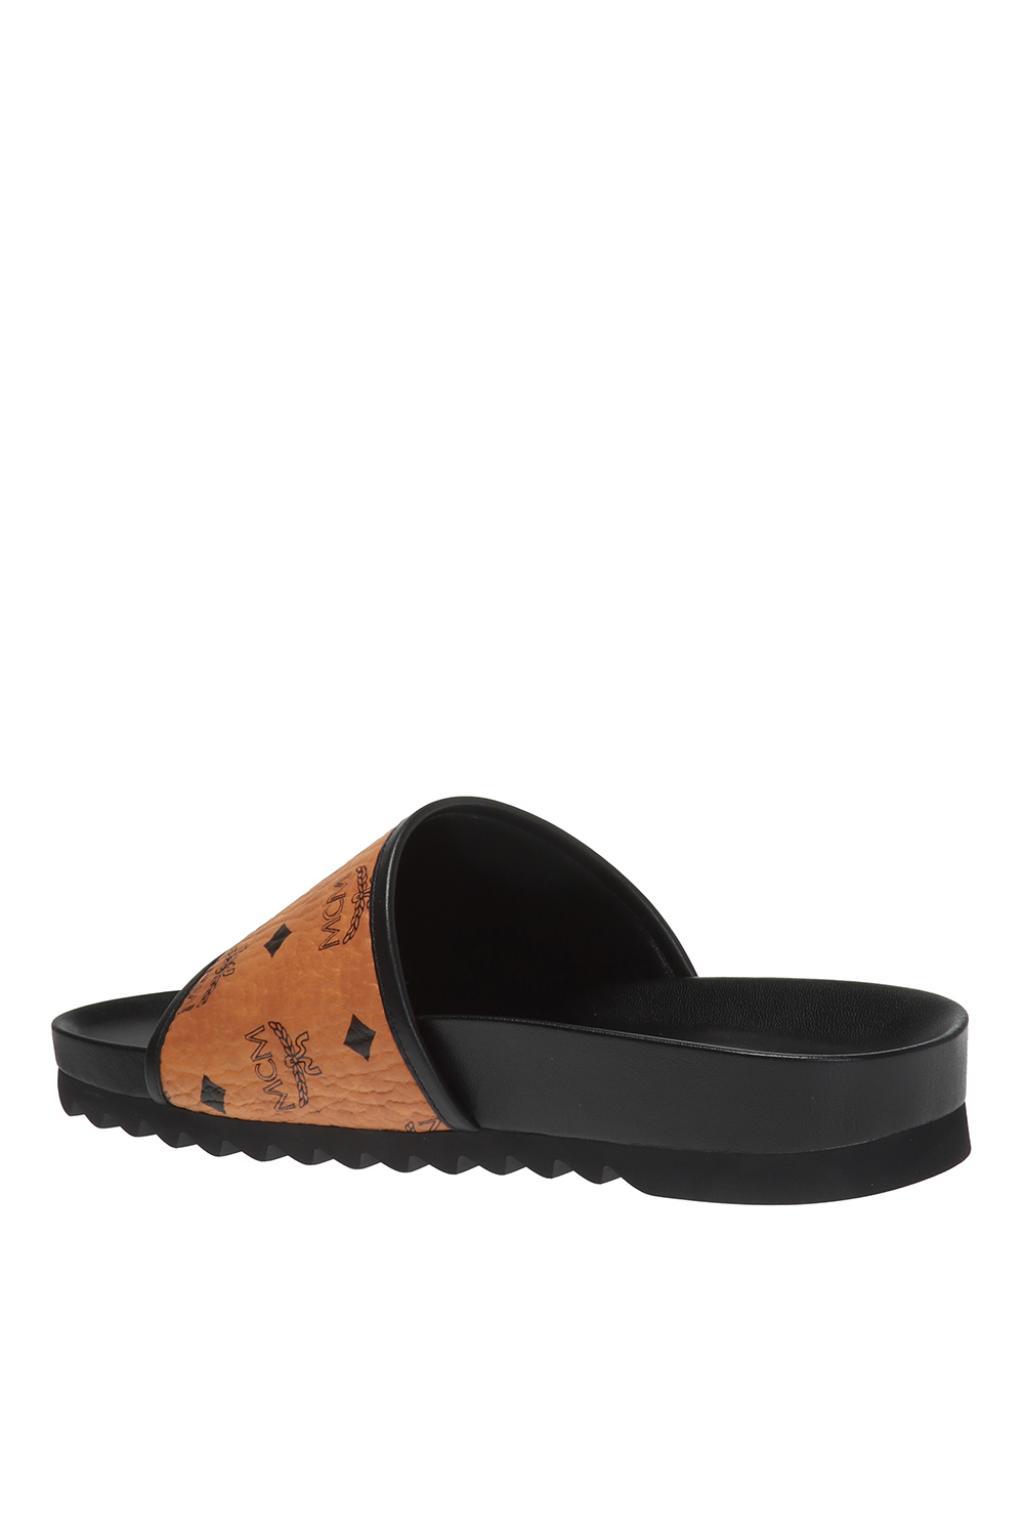 MCM Canvas Slippers With A Logo Pattern in Brown for Men - Lyst